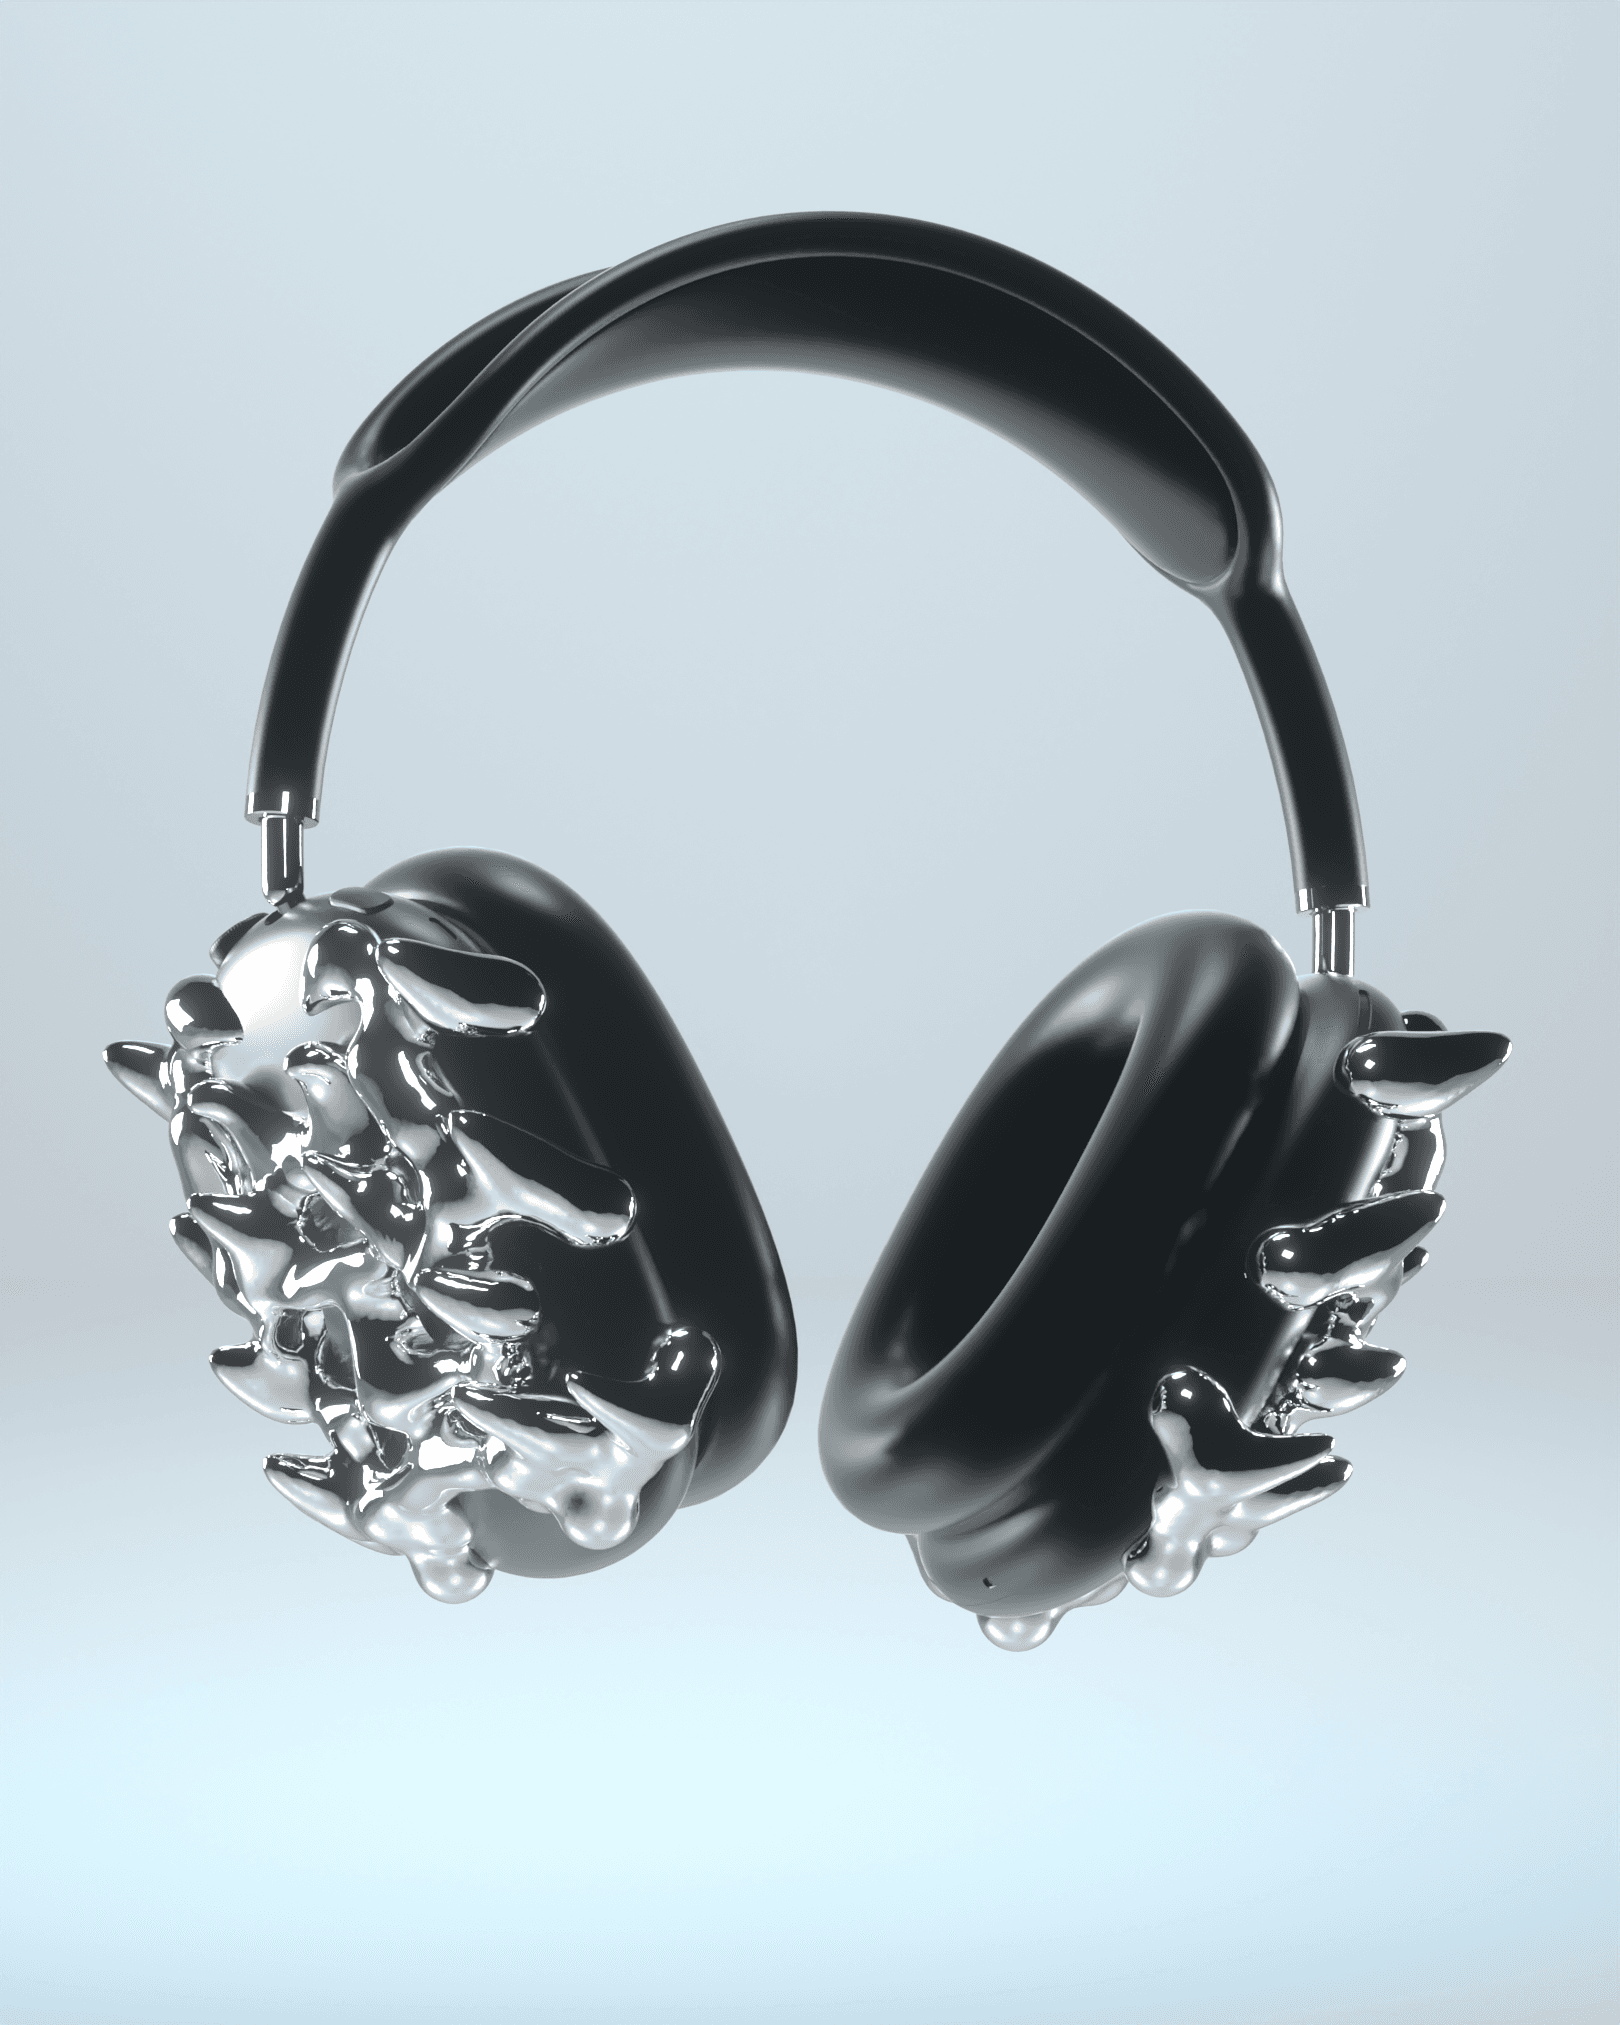 V9 ABSTRACT AIRPODS MAX ACCESSORY 3d model